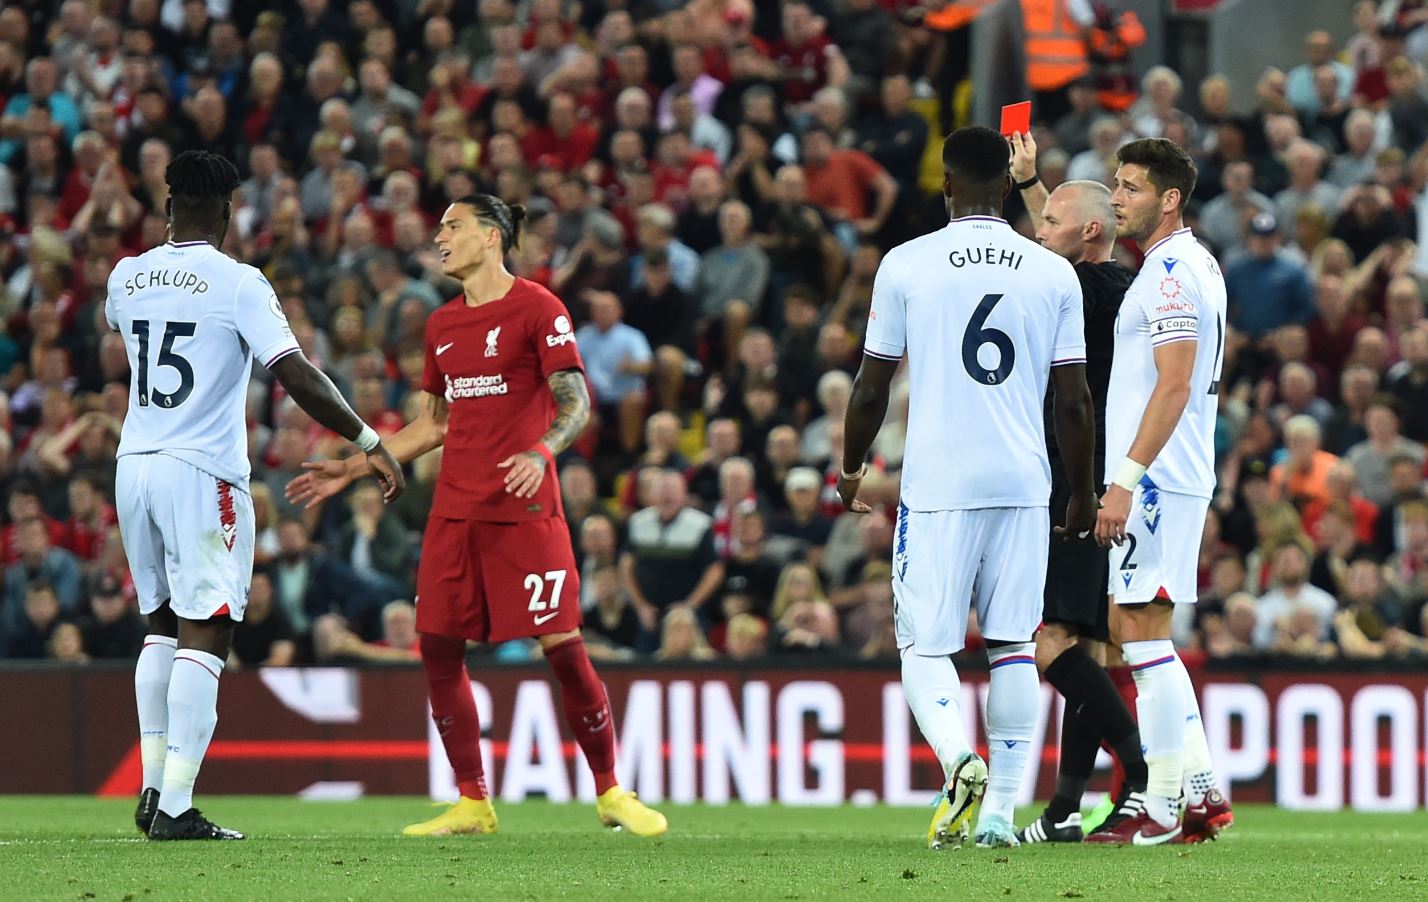 Liverpool coach: Darwin Nunez failed his colleagues and he has to learn the lesson